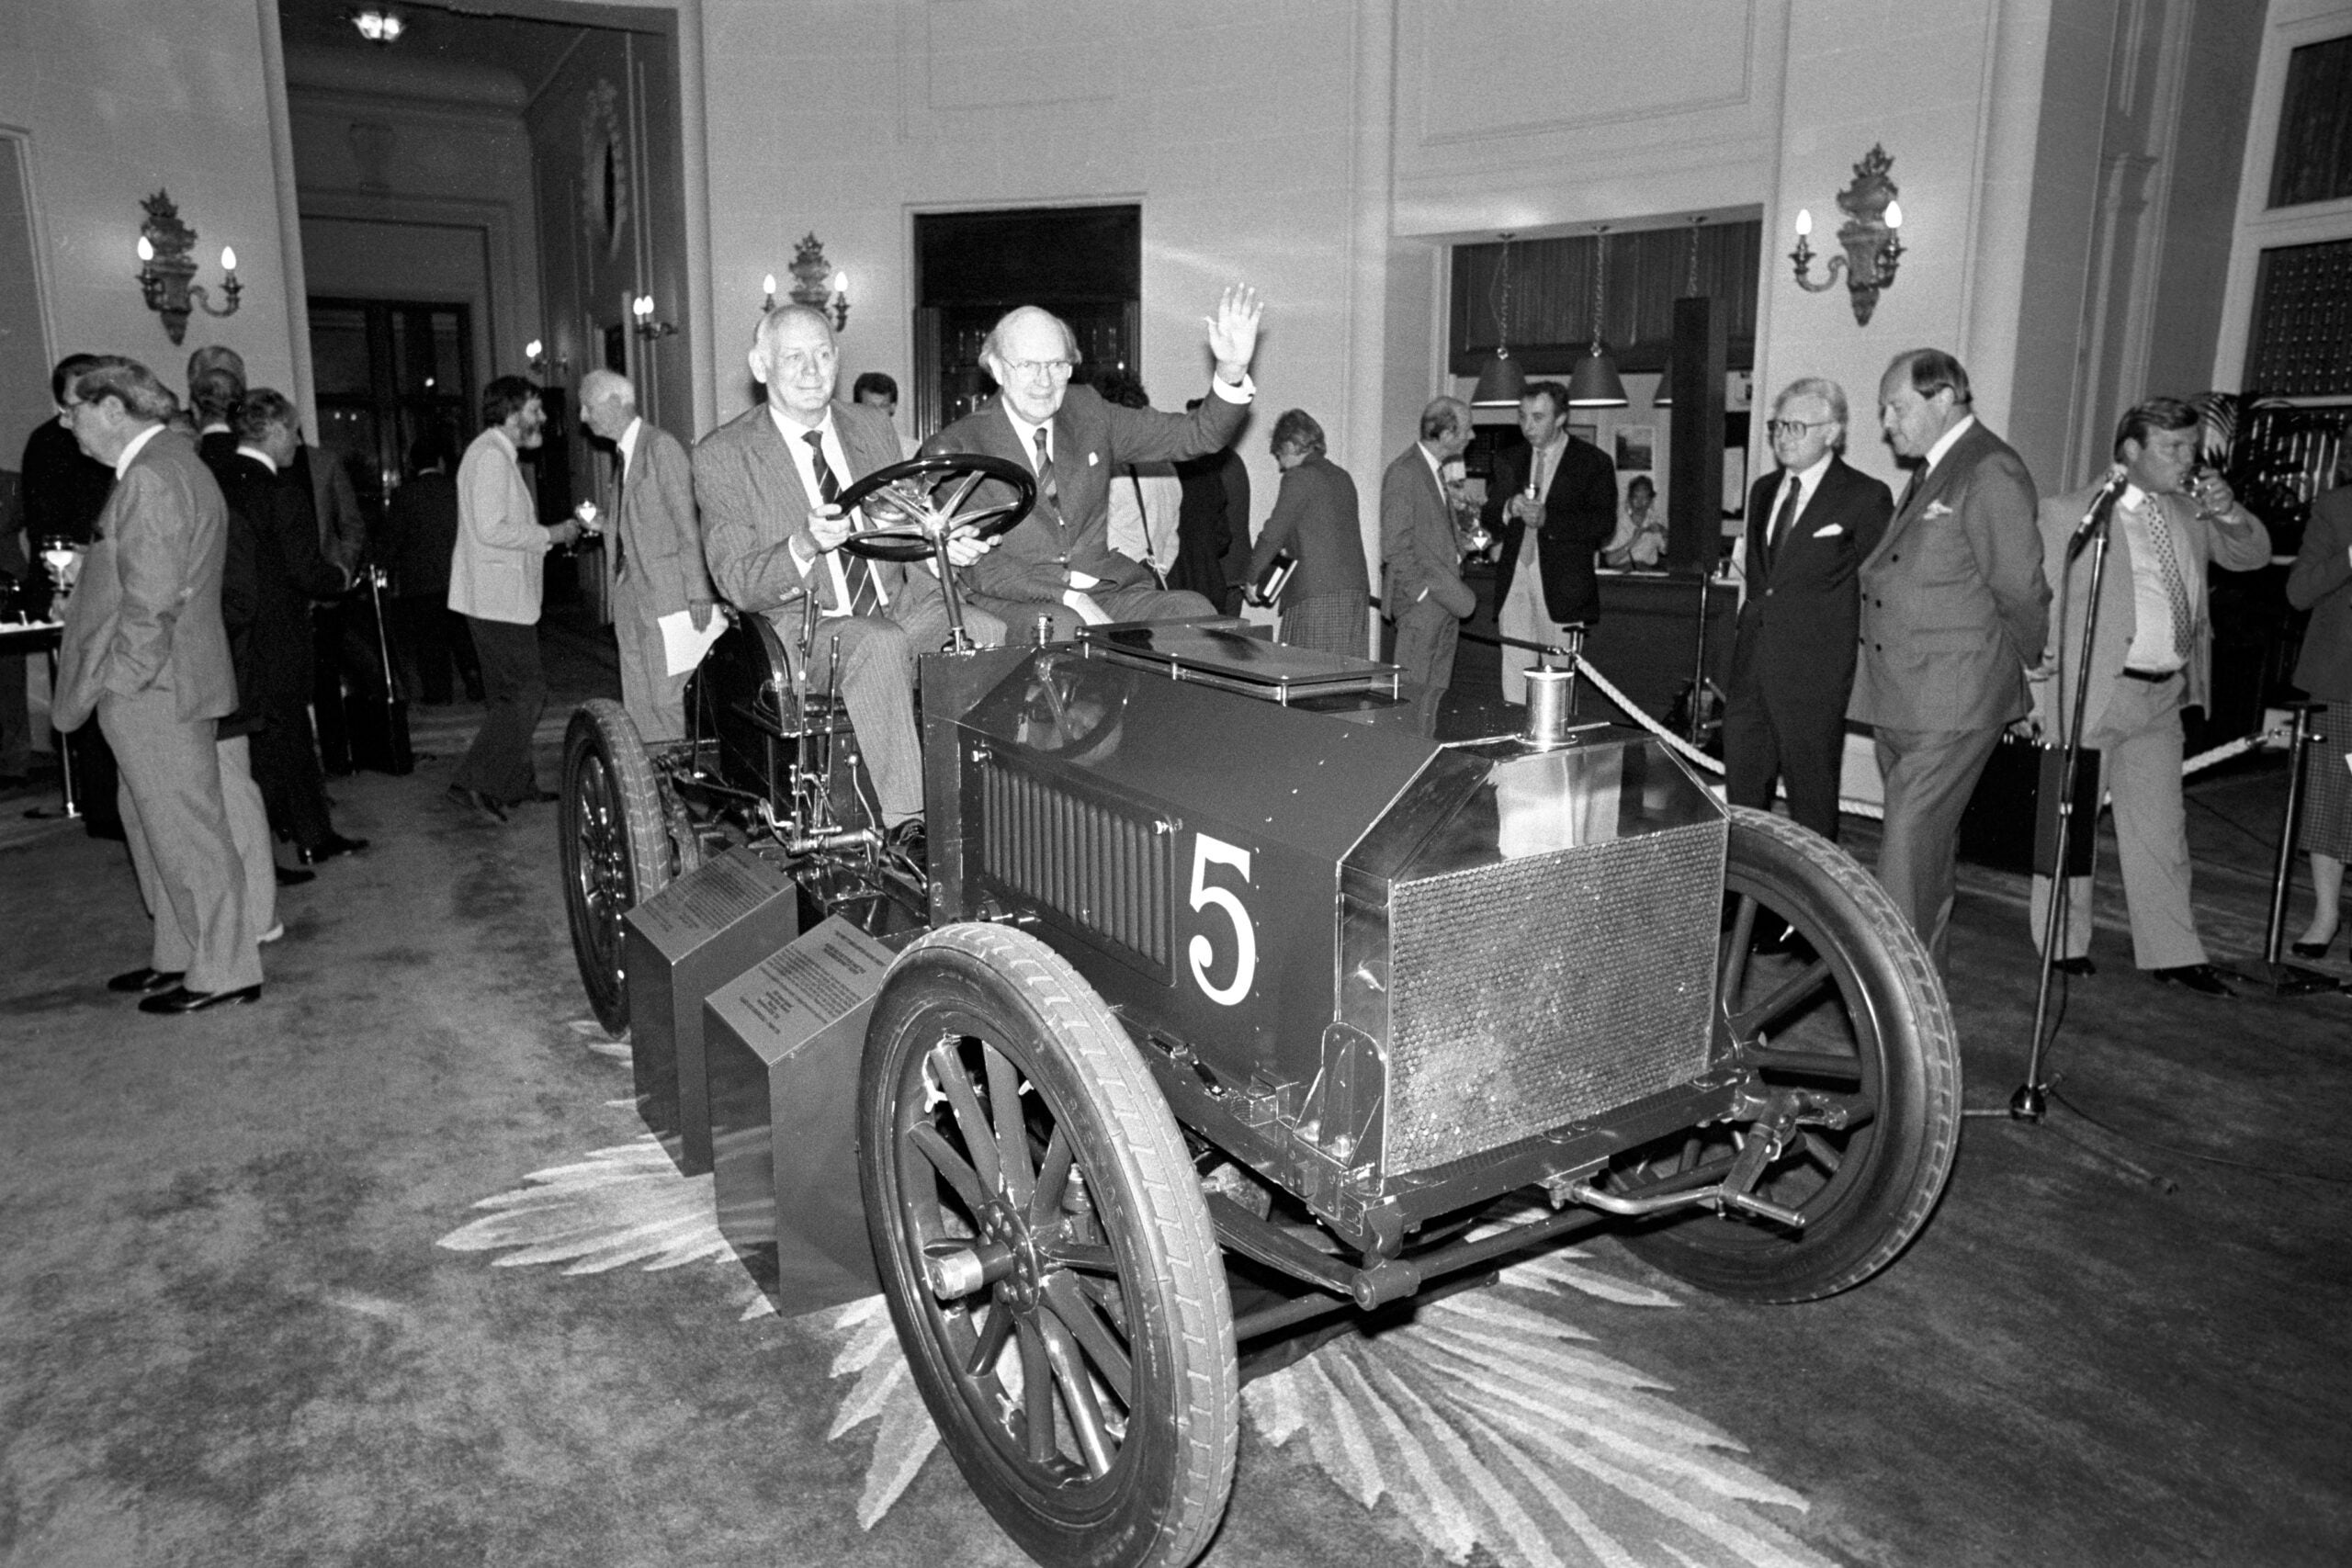 ** Lord Montagu at the wheel of Britain's oldest racing car, the 1903 Gordon Bennett Napier, with Lord Charteris waving from the passenger's seat at the RAC, Pall Mall, London. Lord Montagu, chairman of the National Motor Museum Trust, which bought the car from an American collection.   (Photo by PA Images via Getty Images)